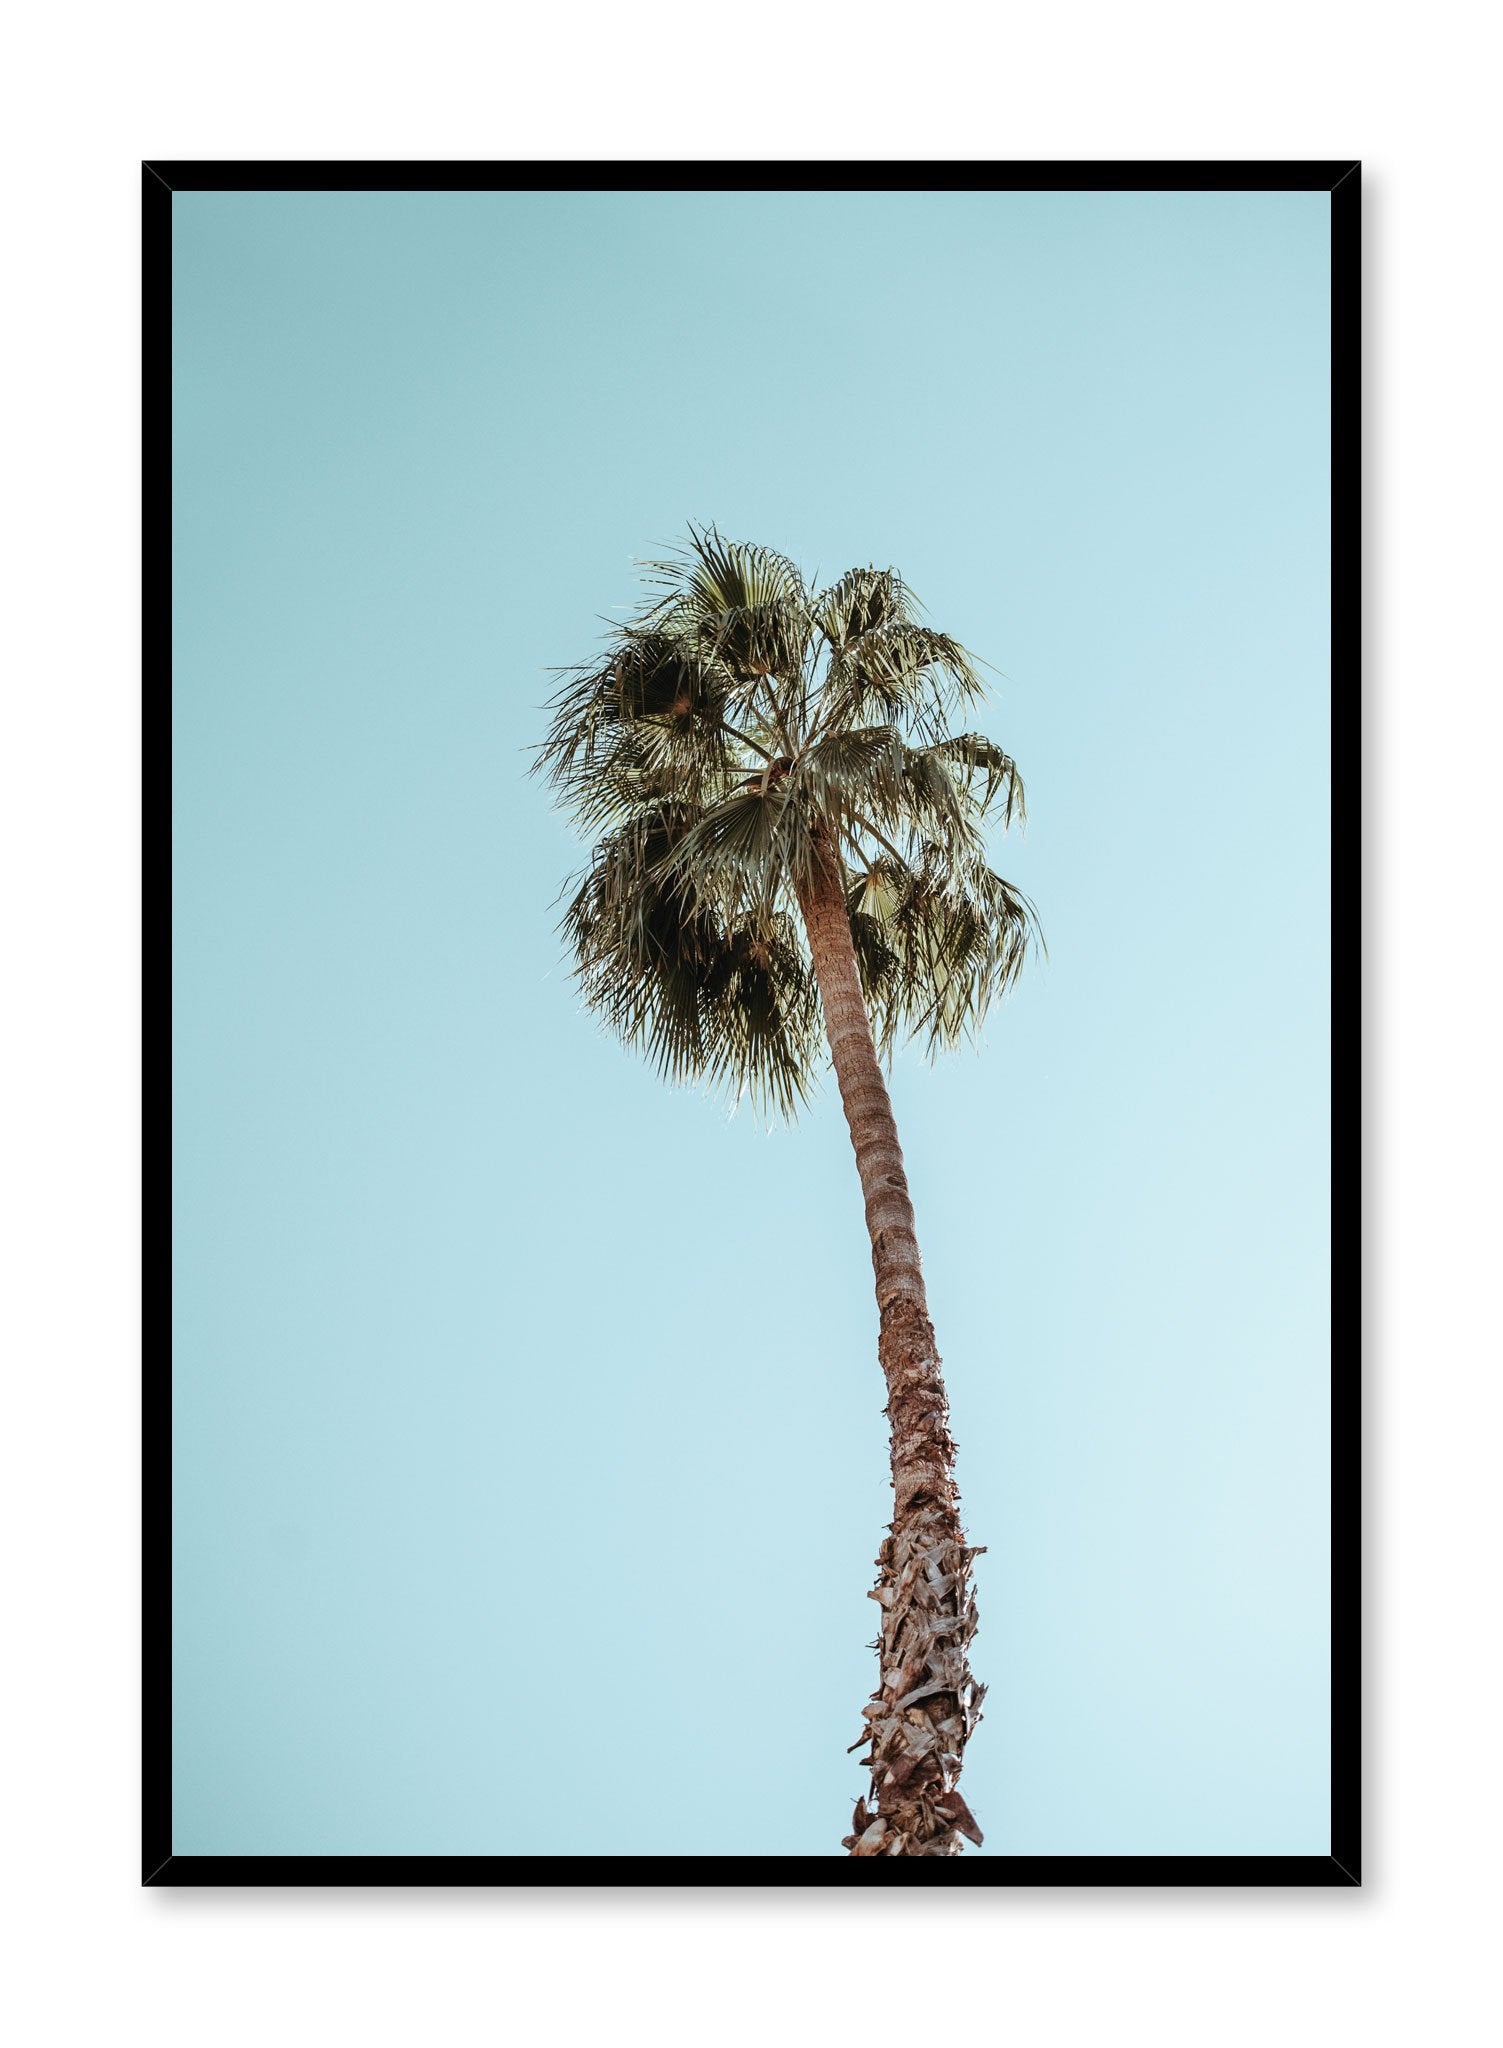 Minimalist design poster by Opposite Wall with palm tree photography